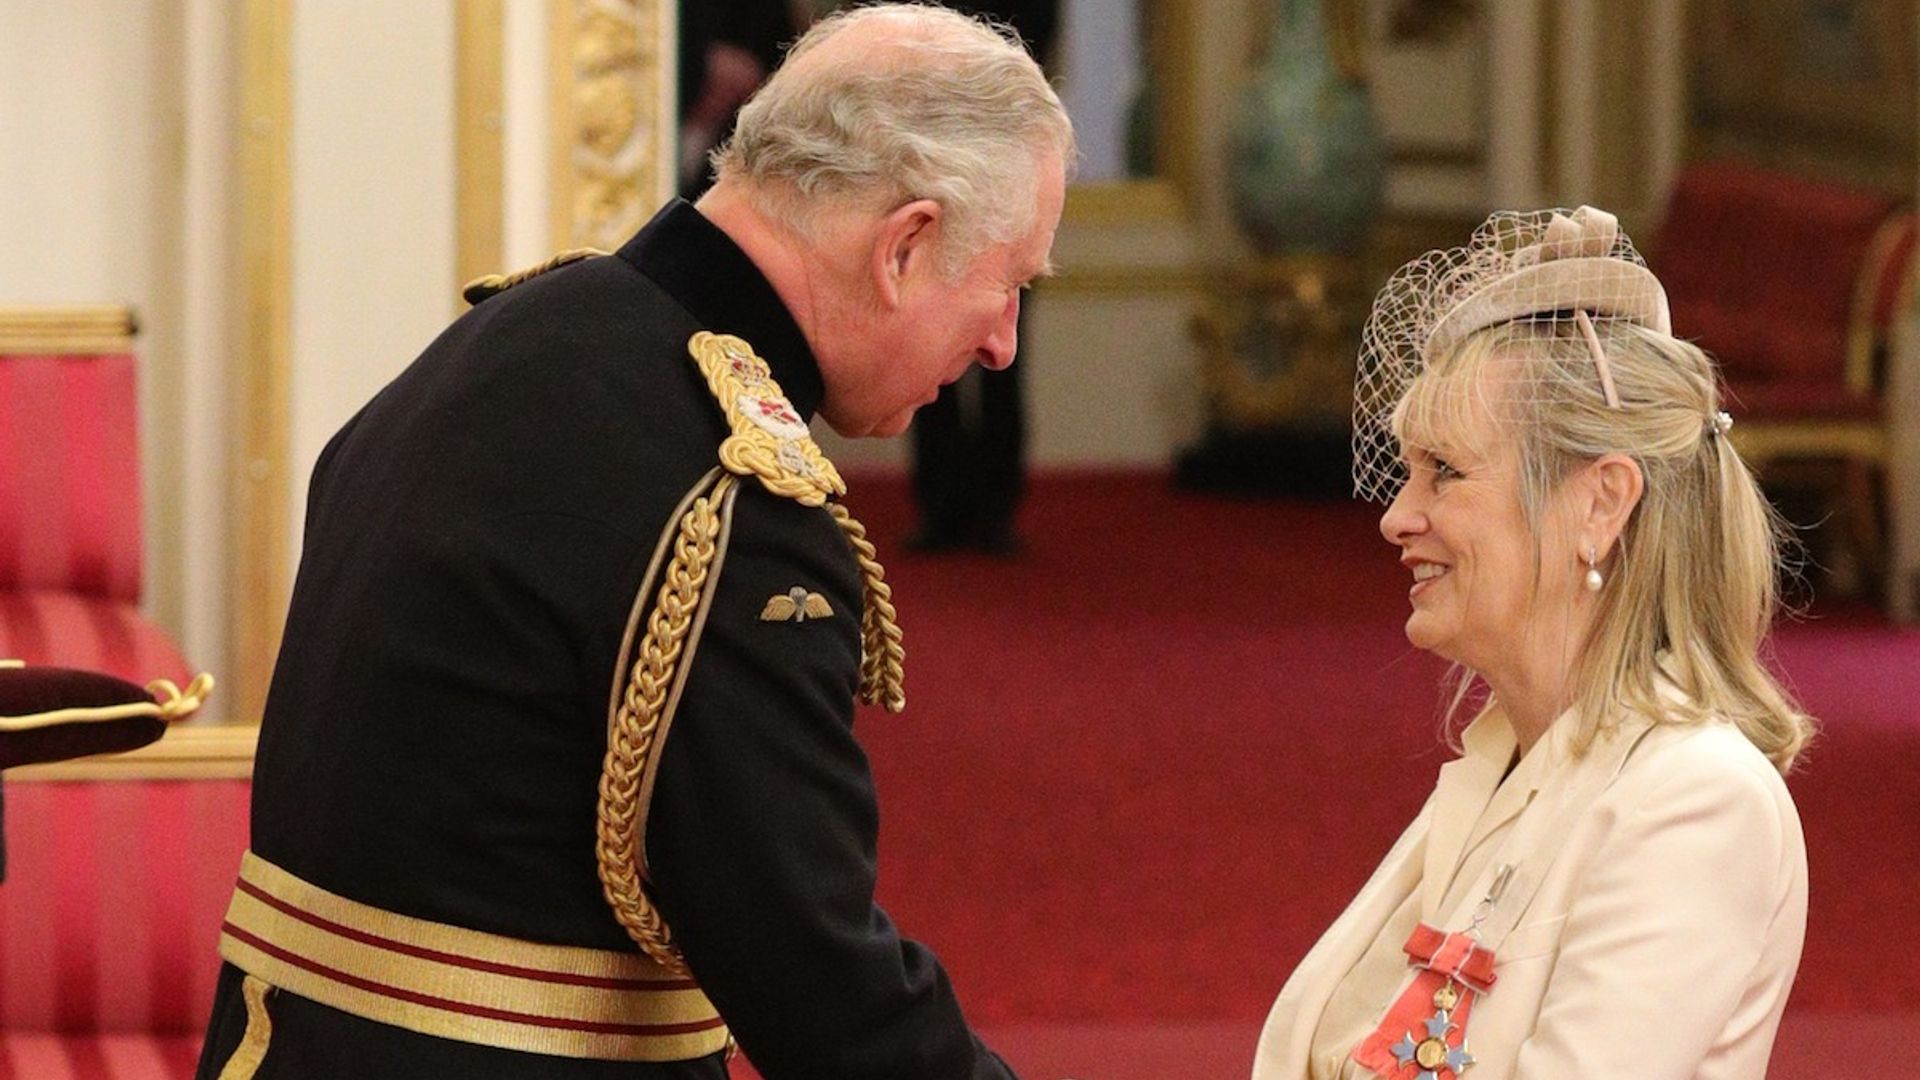 Dame Twiggy! Iconic fashion model accepts her new title at Buckingham Palace in striking white tuxedo